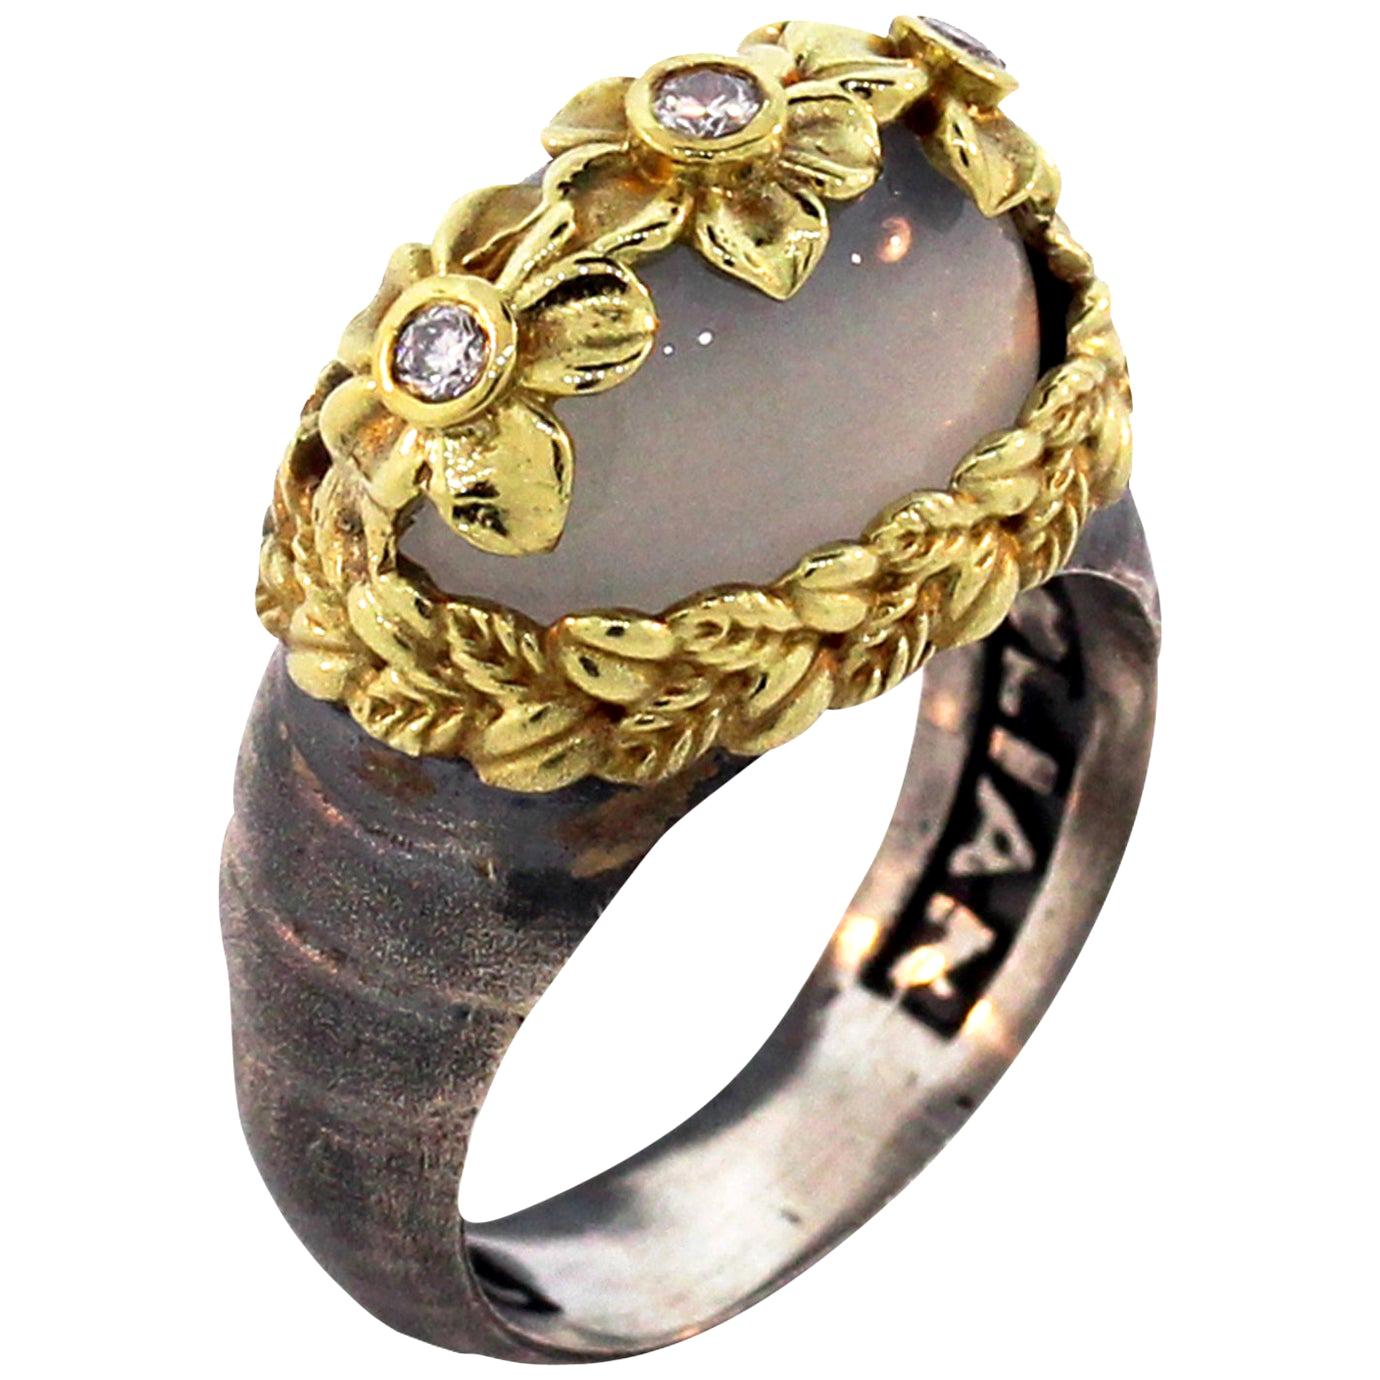 Moonstone and Diamond Floral Ring with Sterling Silver and Gold Stambolian